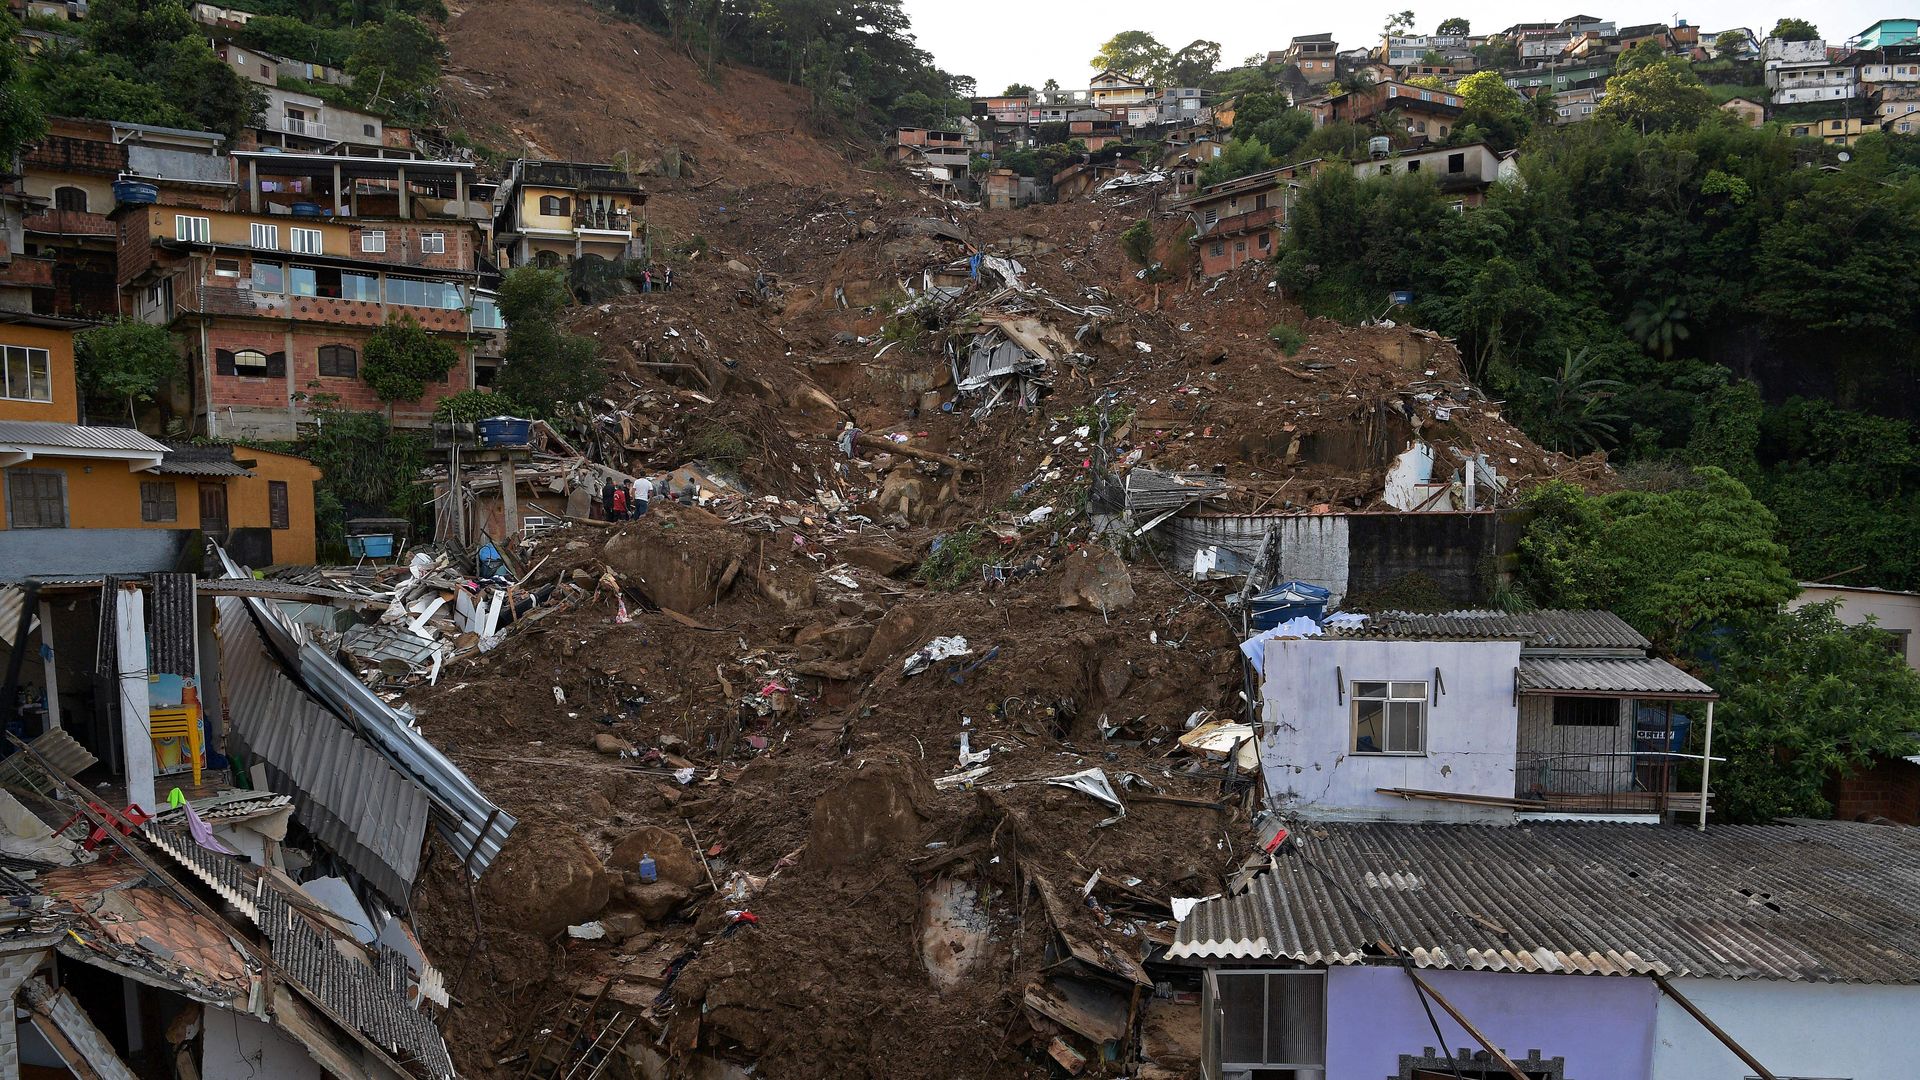 View after a mudslide in Petropolis, Brazil on February 17, 2022 during the second day of rescue operations.